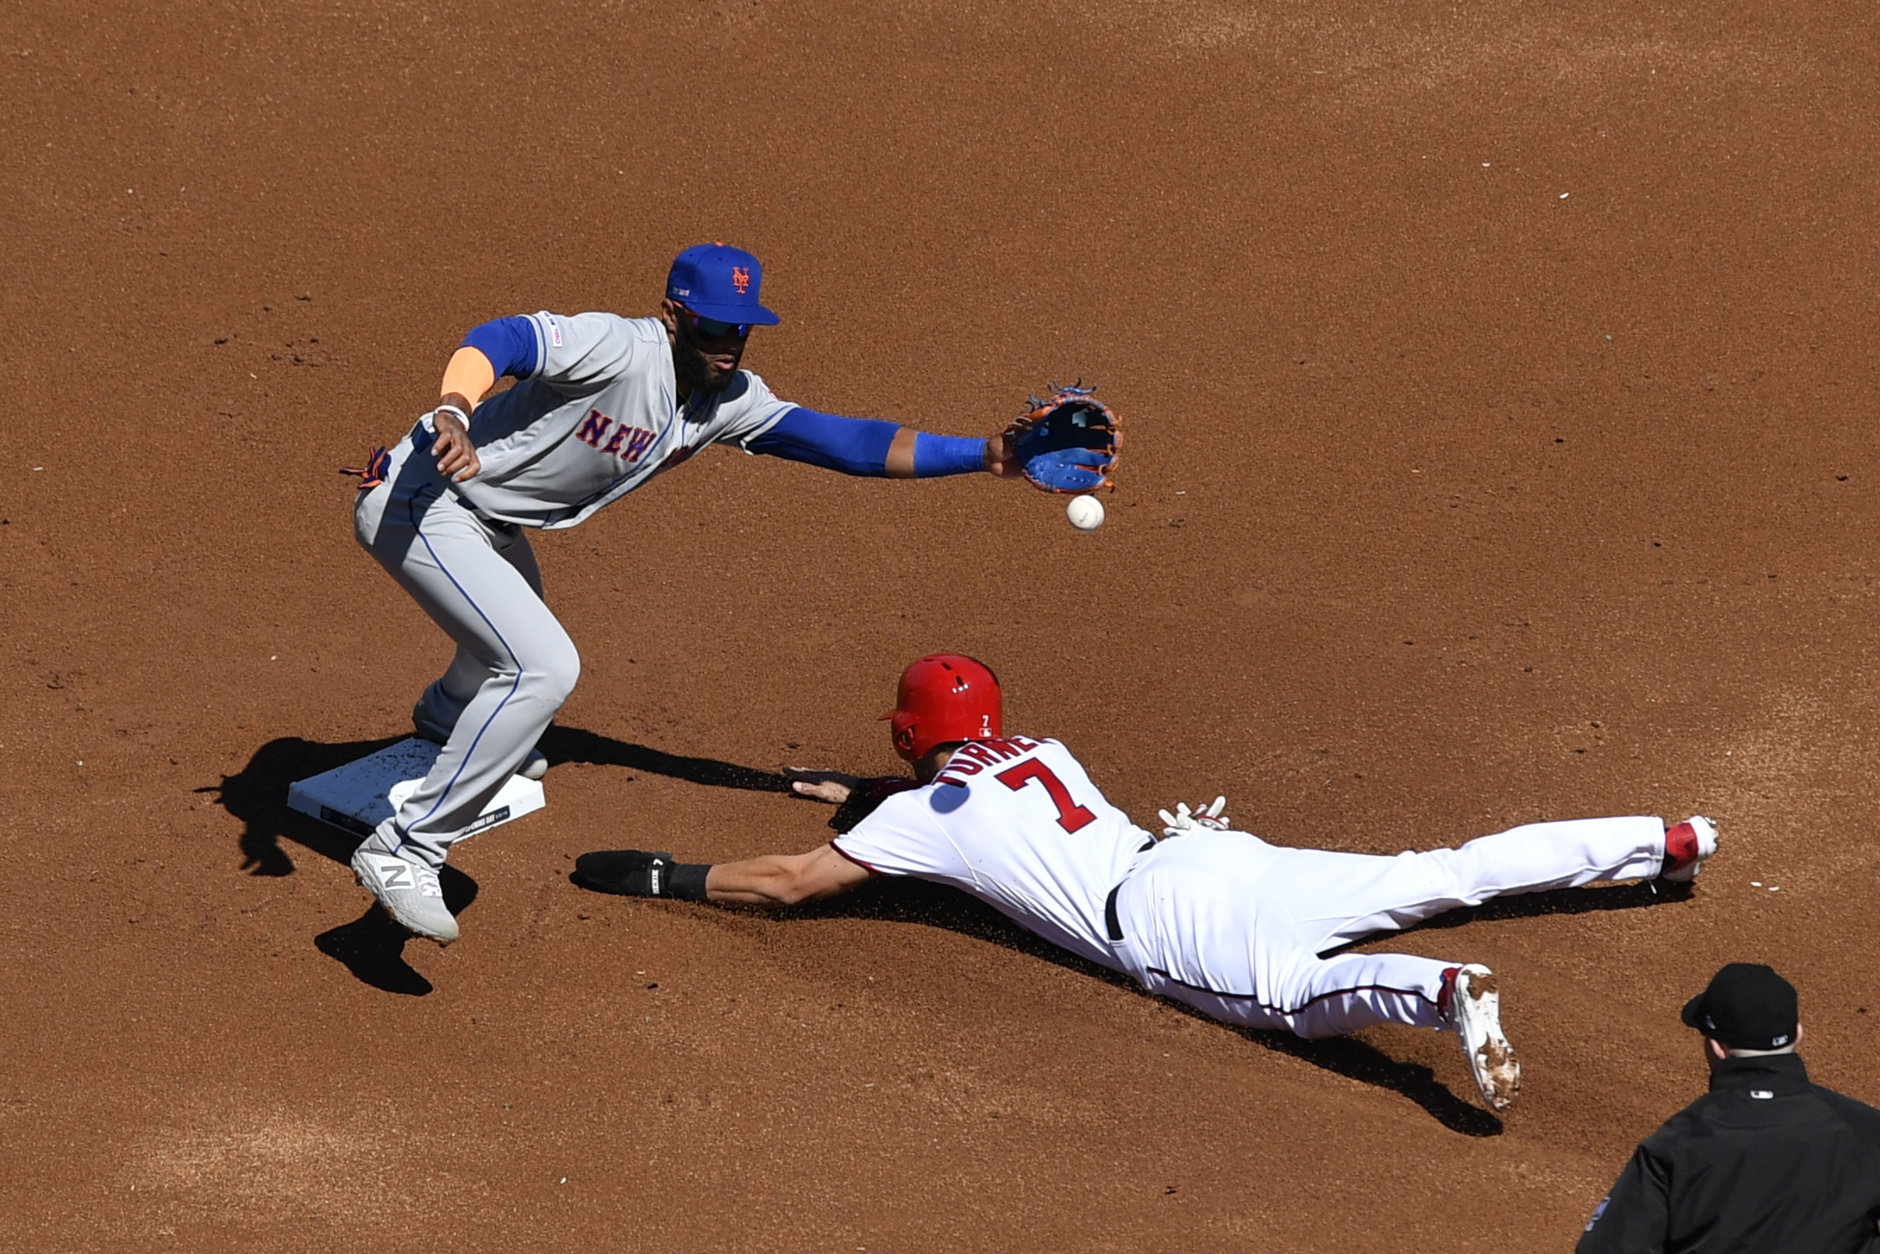 WASHINGTON, DC - MARCH 28: Trea Turner #7 of the Washington Nationals steals second base against Amed Rosario #1 of the New York Mets in the first inning on Opening Day at Nationals Park on March 28, 2019 in Washington, DC. (Photo by Patrick McDermott/Getty Images)